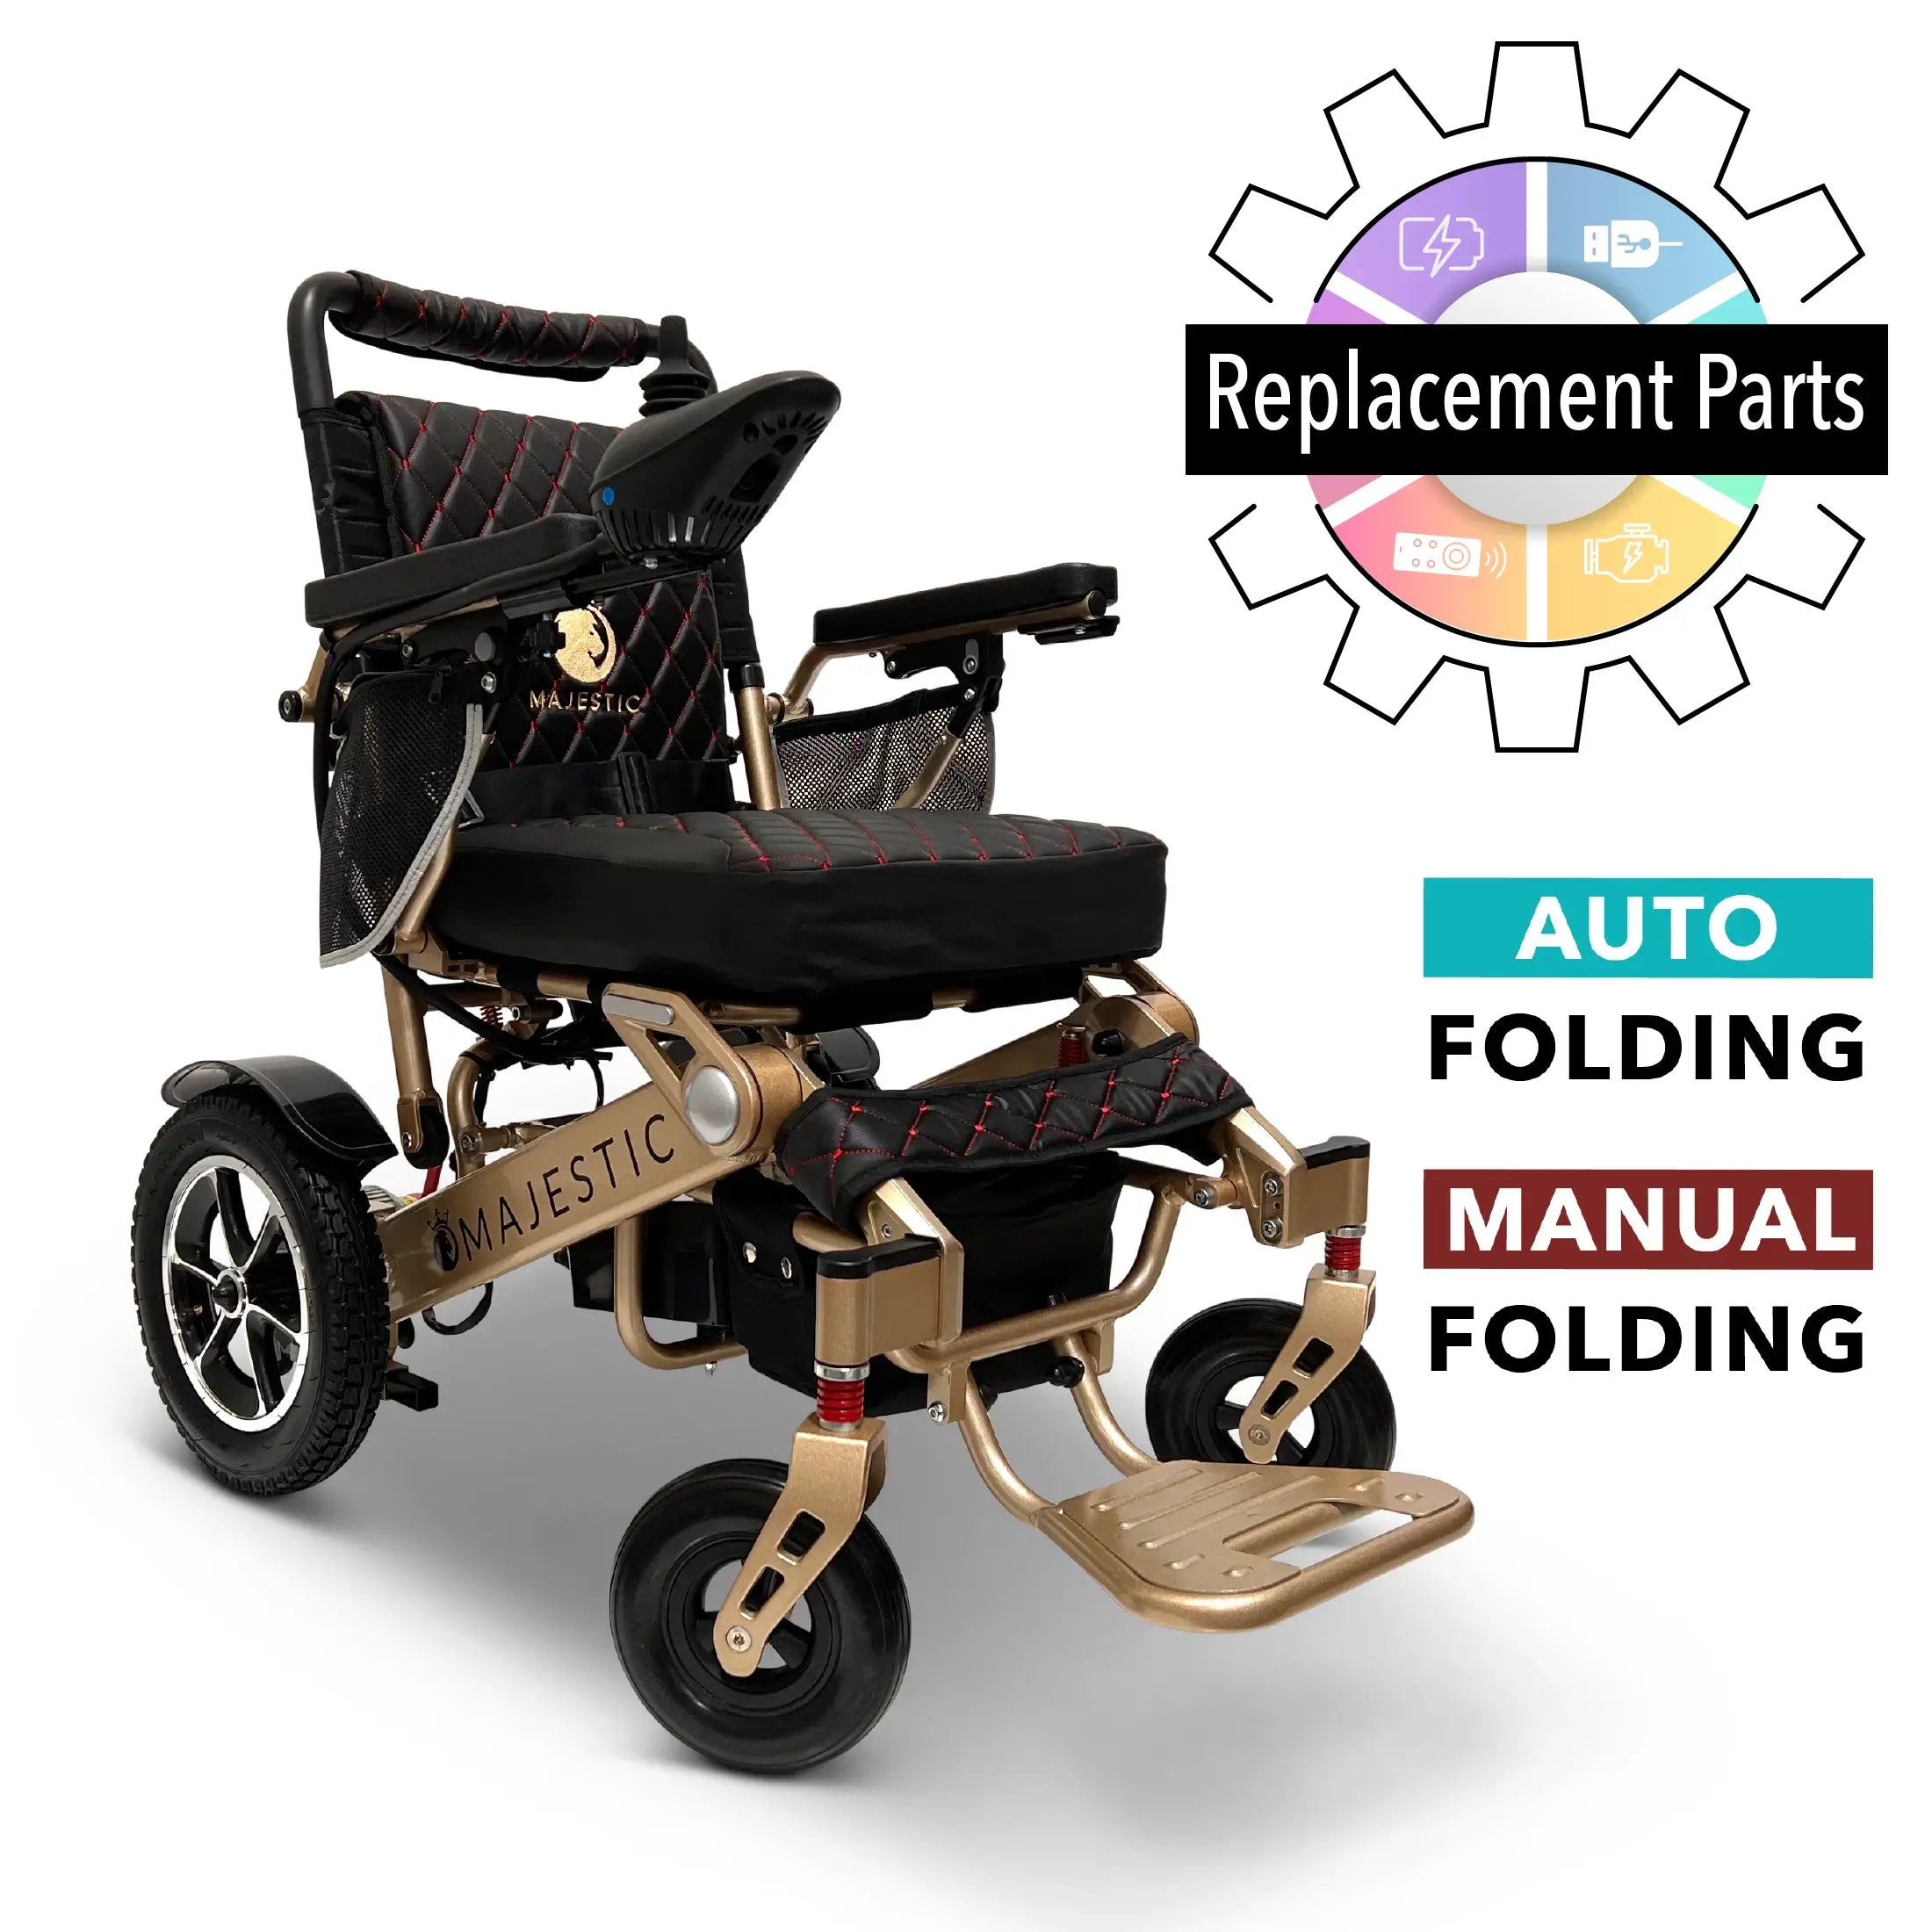 IQ-7000 Electric Wheelchair Replacement Parts